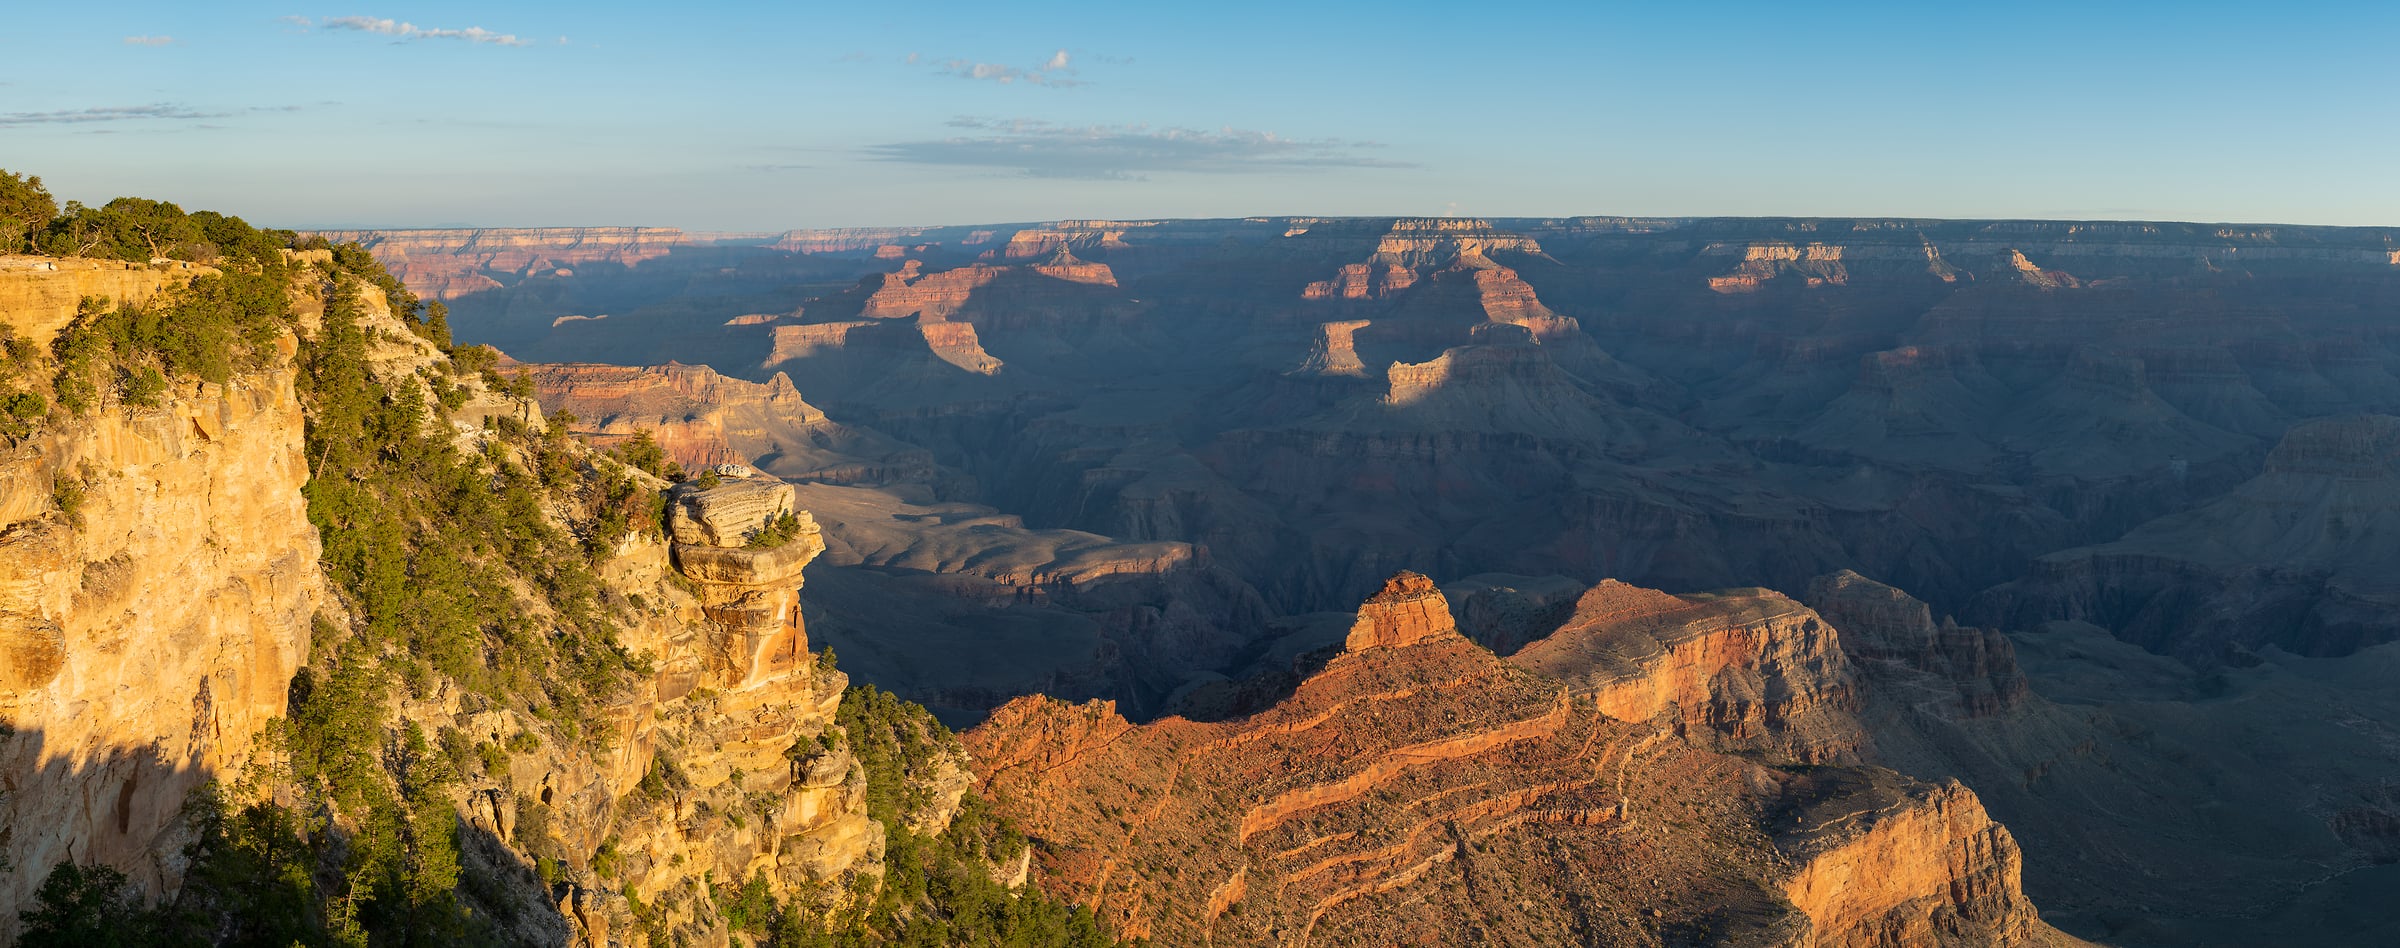 419 megapixels! A very high resolution, large-format VAST photo taken from Yaki Point at sunrise; landscape photograph created by Greg Probst in Grand Canyon National Park, Arizona.